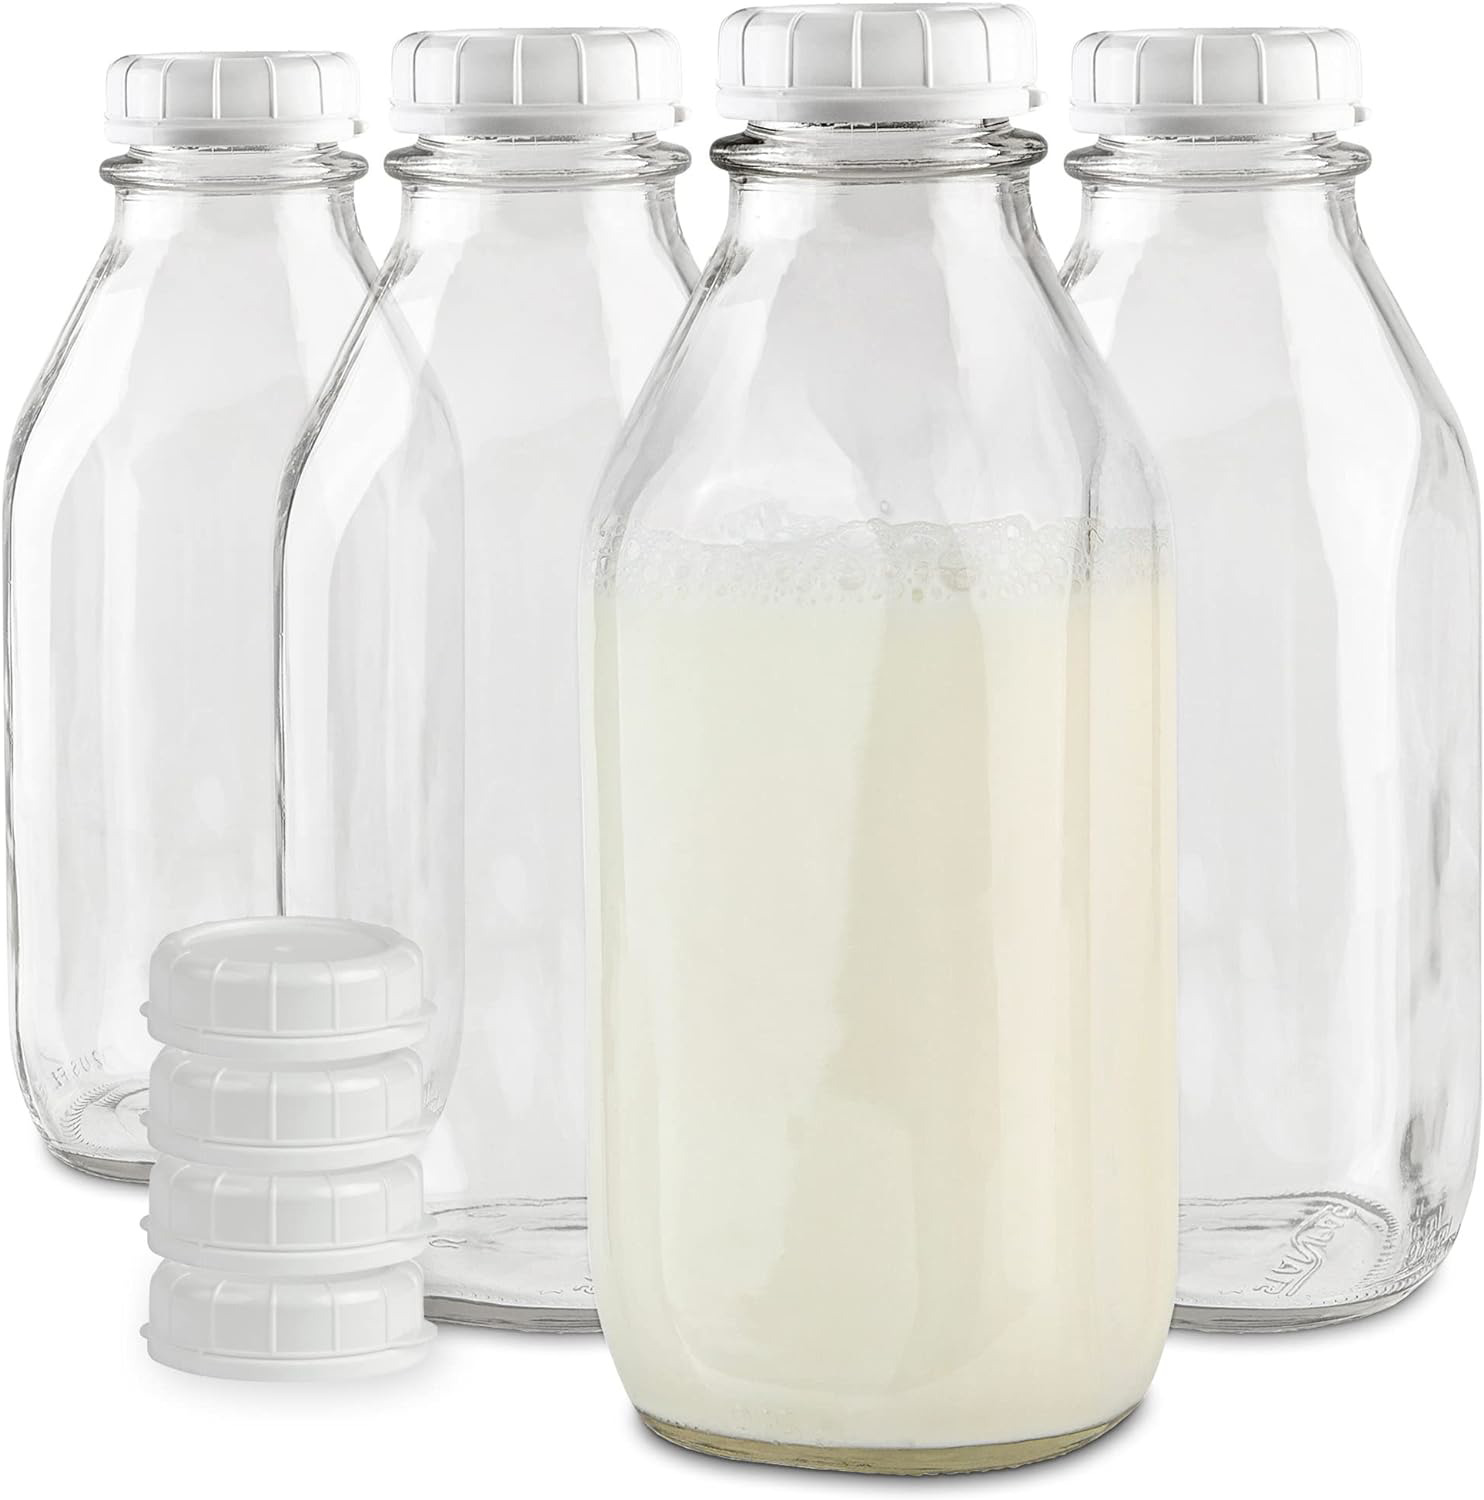 Stock Your Home Liter Glass Milk Bottle with Lid 4 Pack 32 Oz Jugs and 8 White